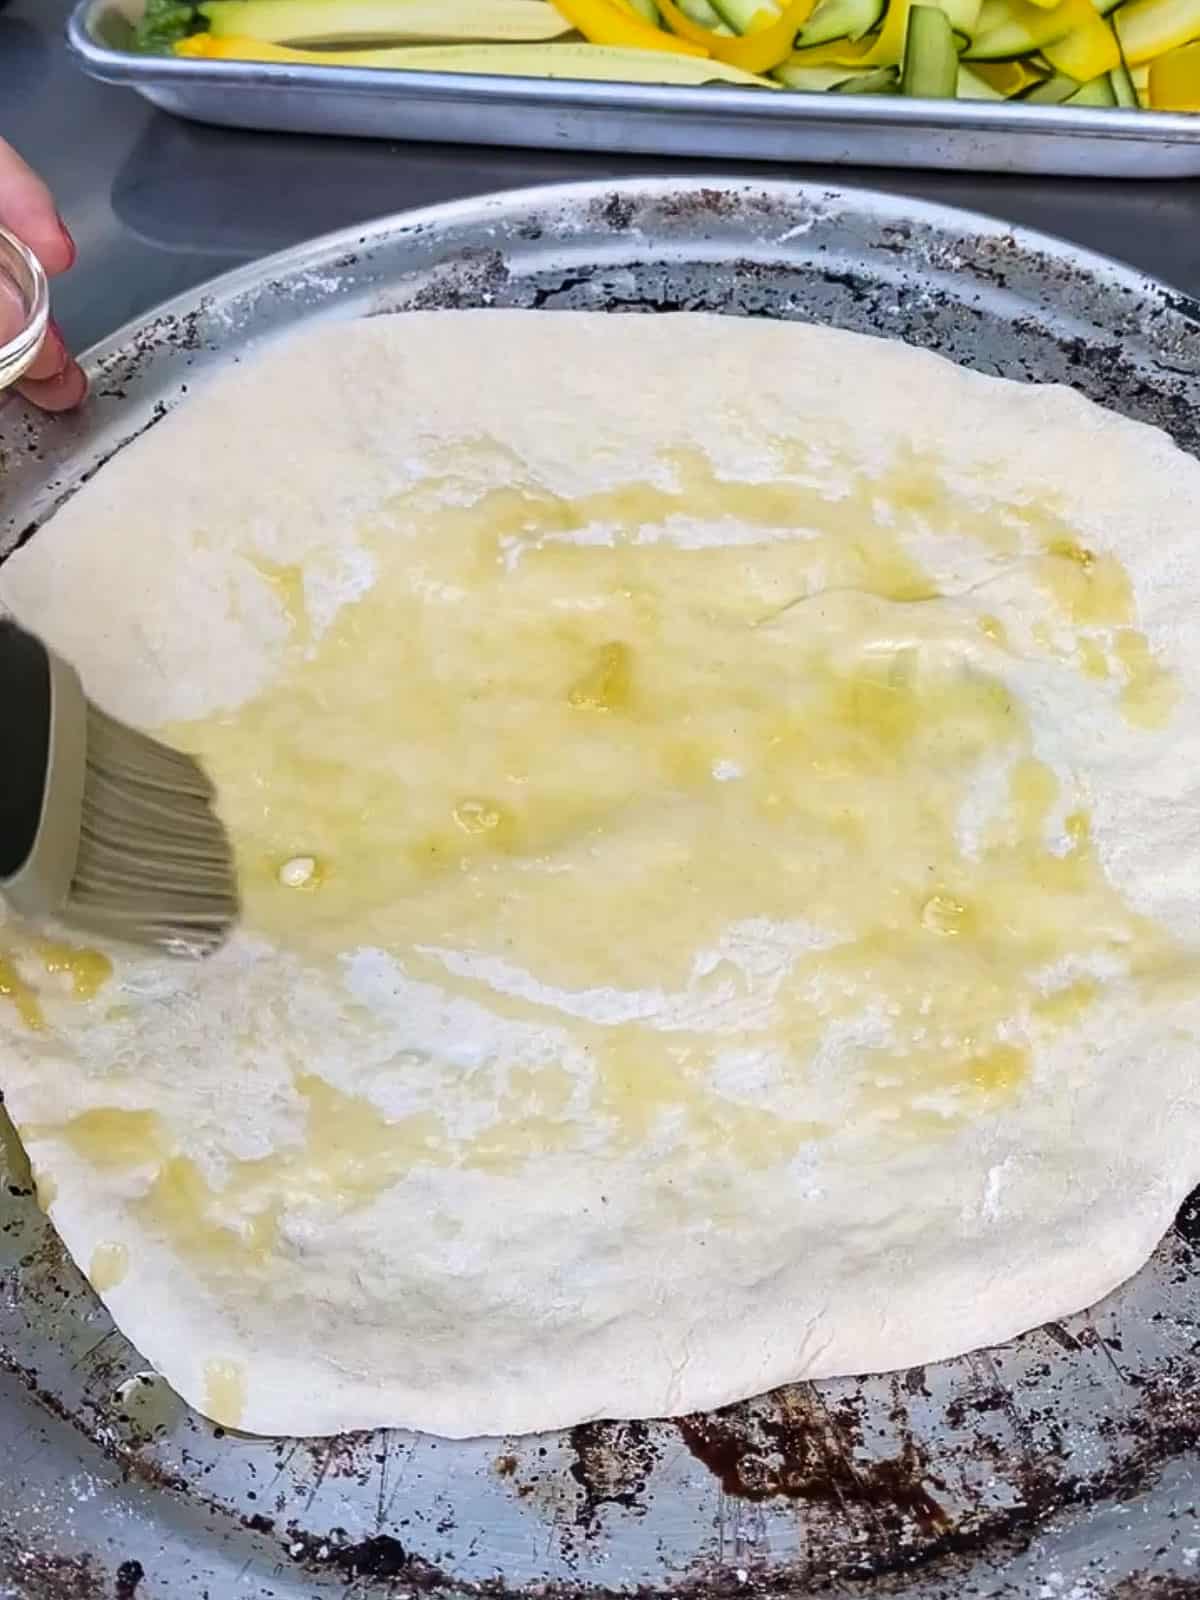 Brush garlic onto the stretched out pizza dough.